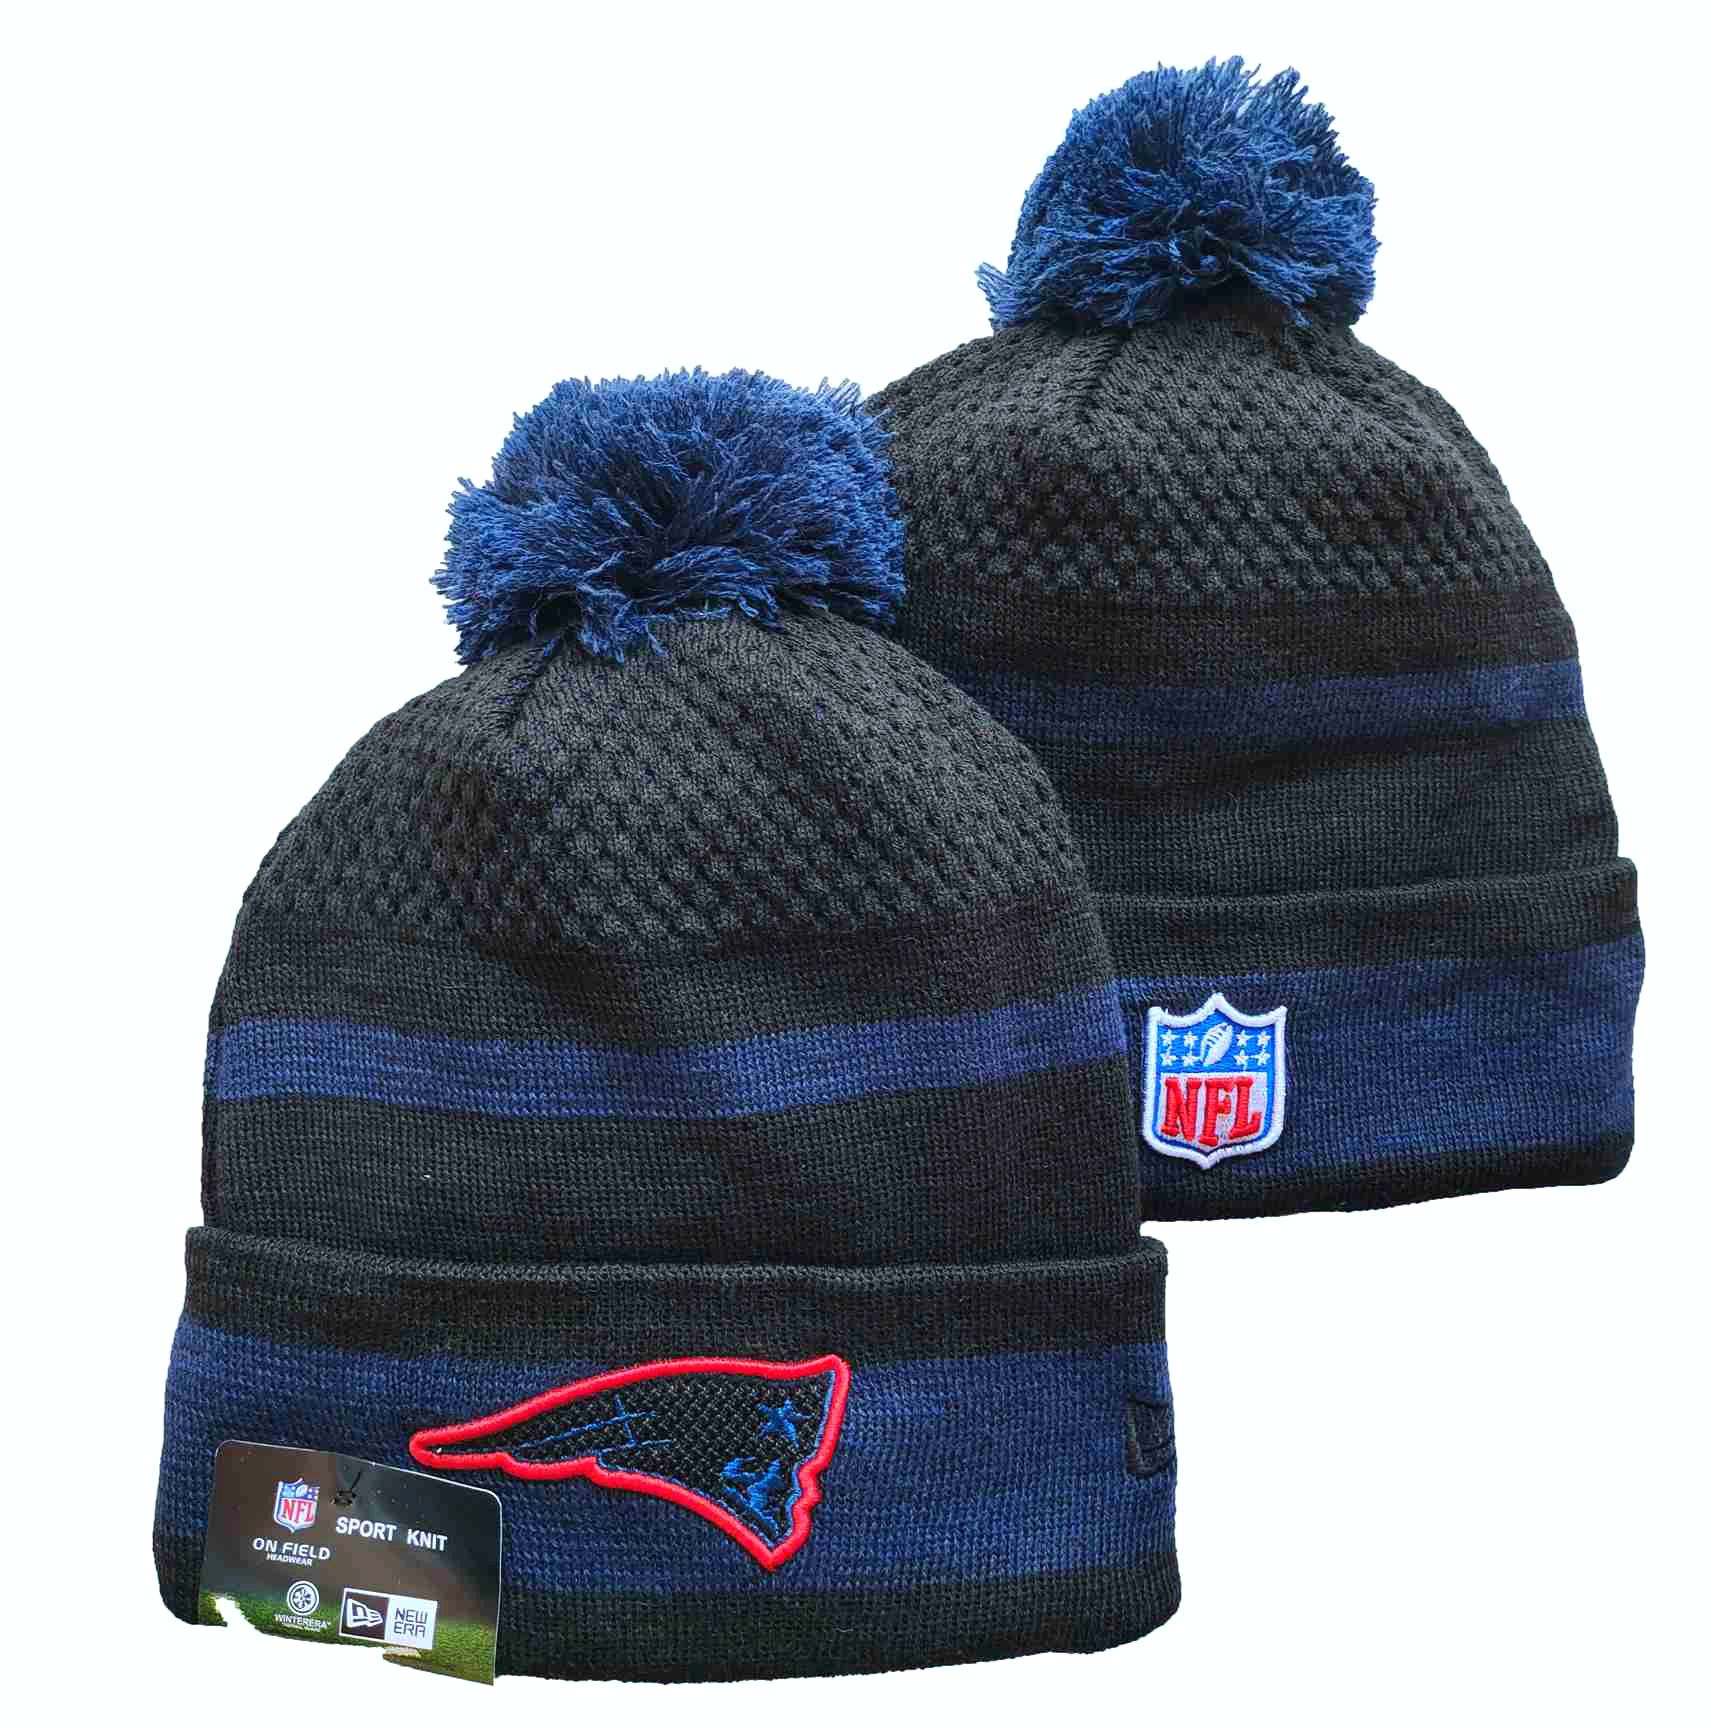 NFL New England Patriots Beanies Knit Hats-YD1248